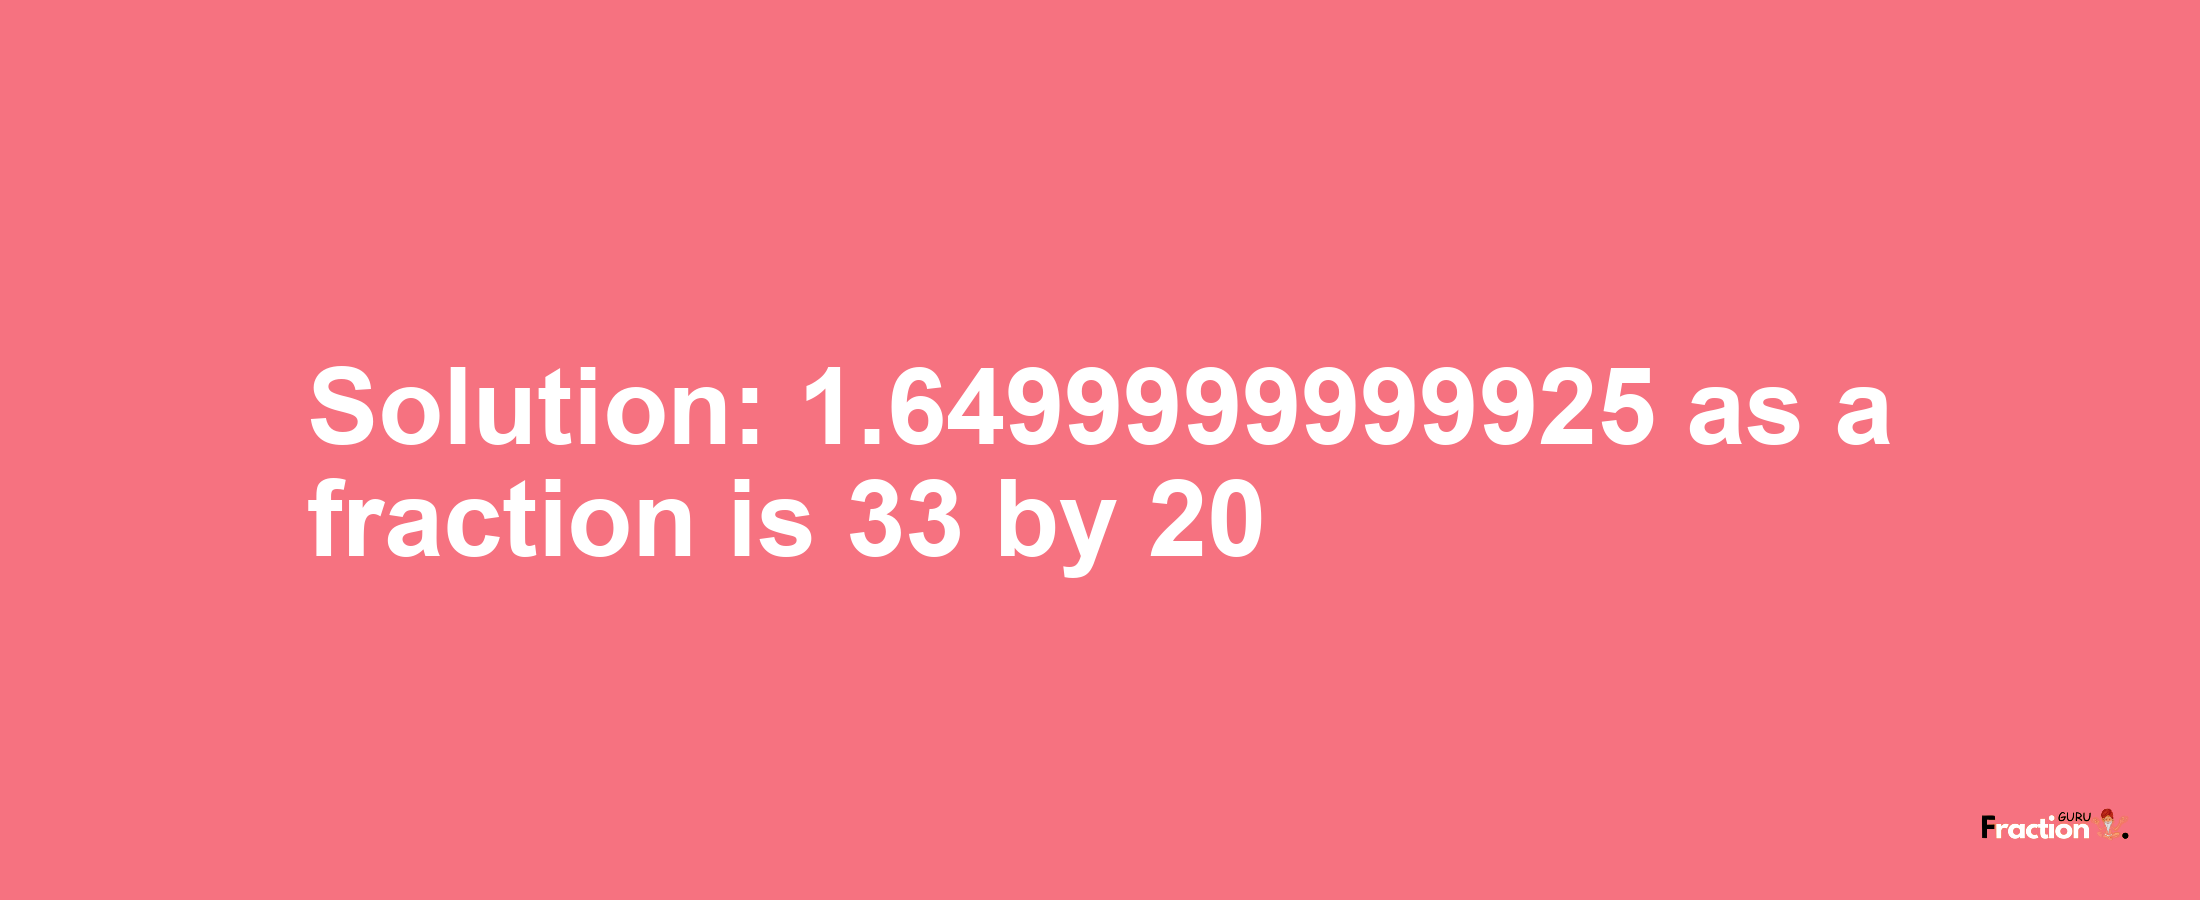 Solution:1.6499999999925 as a fraction is 33/20